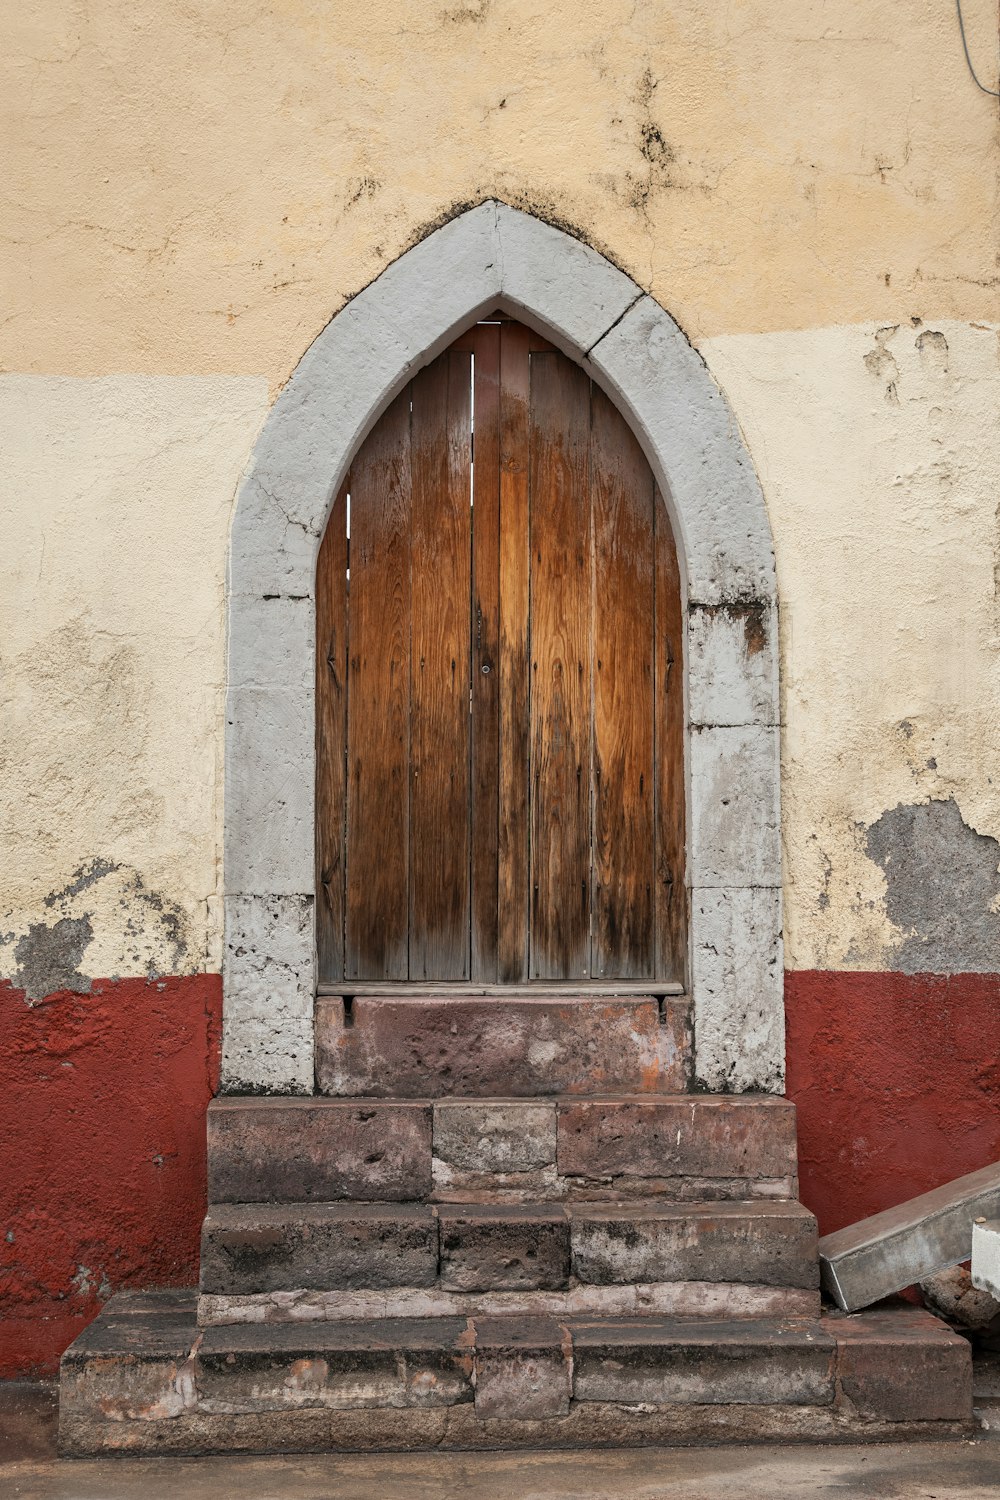 a wooden door with a stone step in front of it